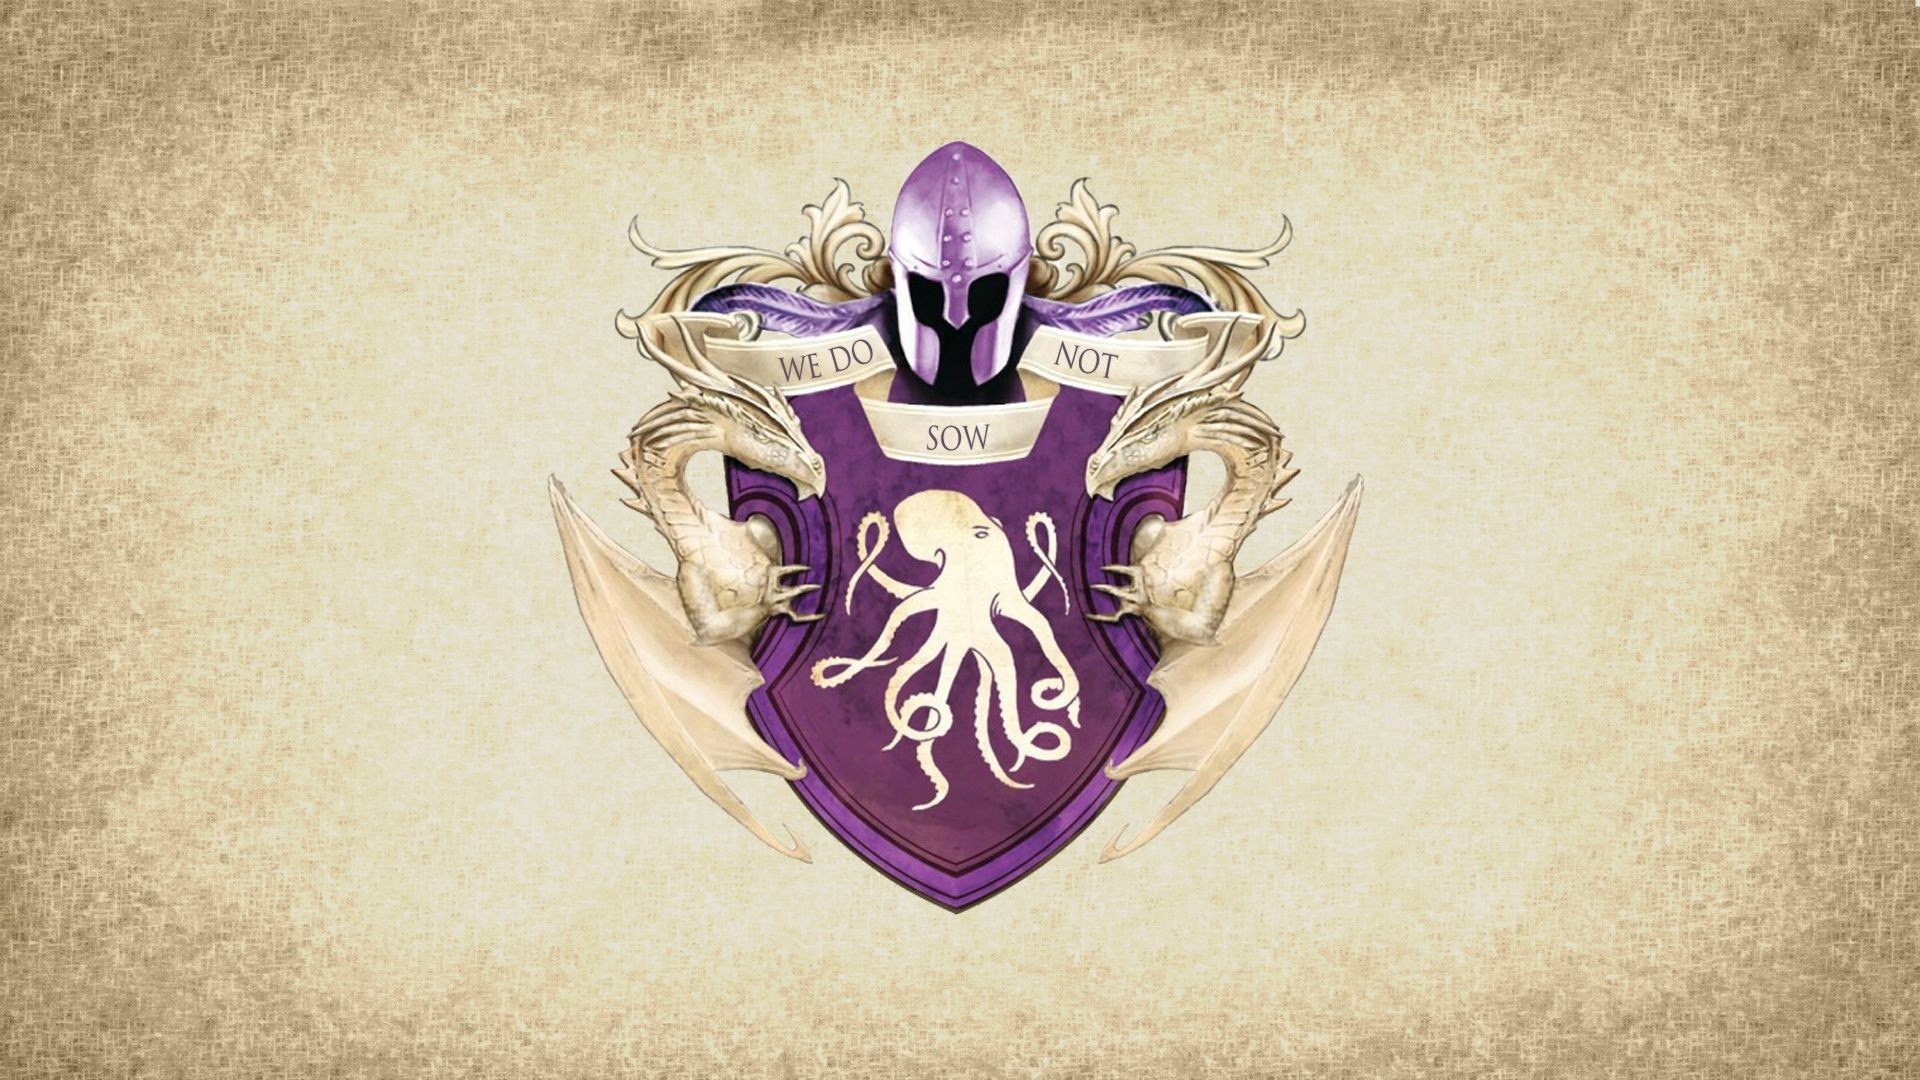 artwork, Paper, A Song Of Ice And Fire, Coats Of Arms, Crest, House Greyjoy, Sigils, Game Of Thrones, Kraken Wallpaper